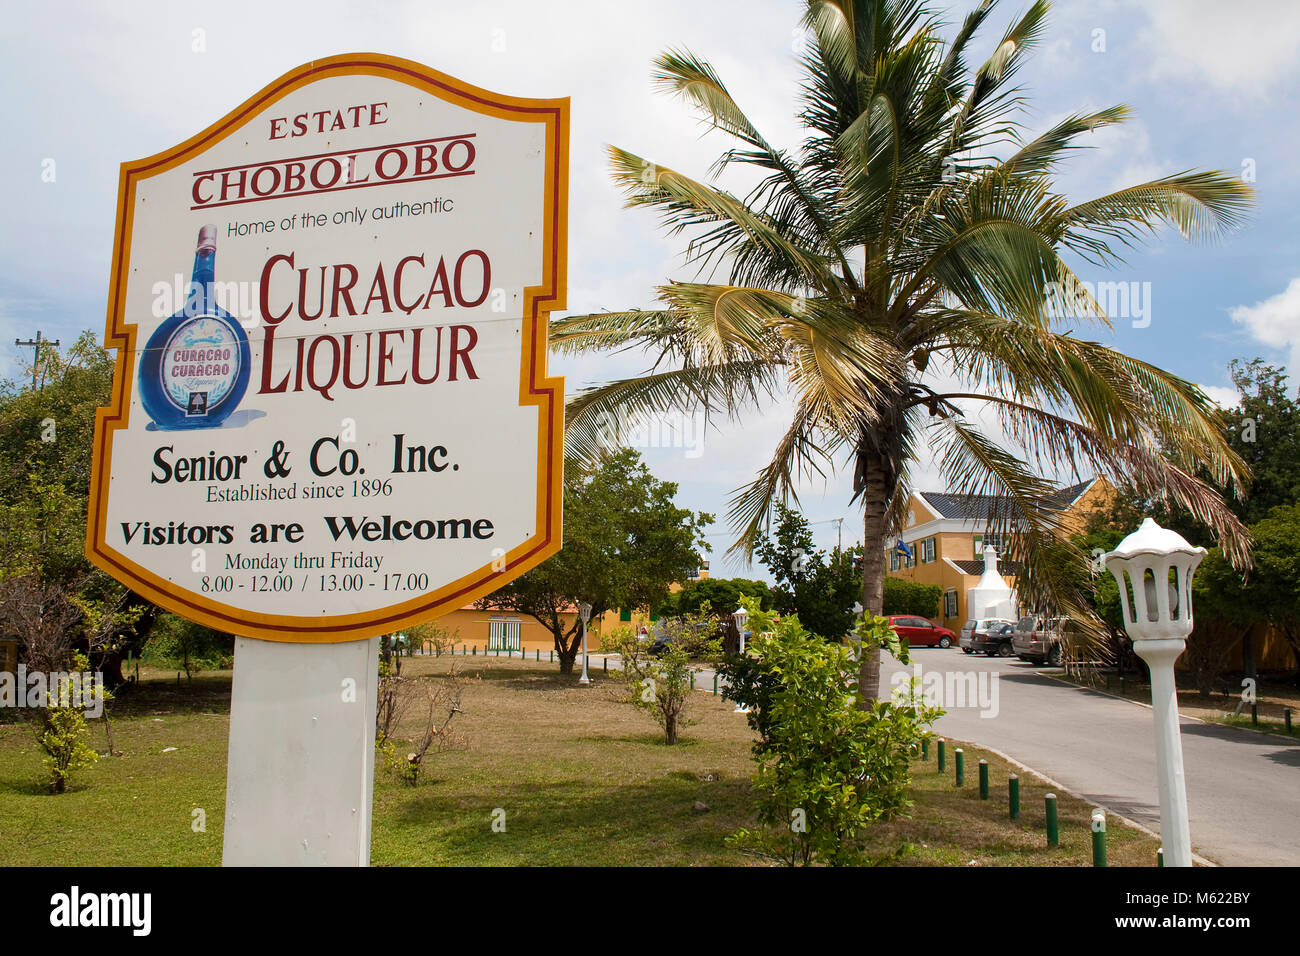 Chobolobo, liqueur manufacture, producer of the famous Blue Curacao, Willemstad, Curacao, Netherlands Antilles, Caribbean Stock Photo